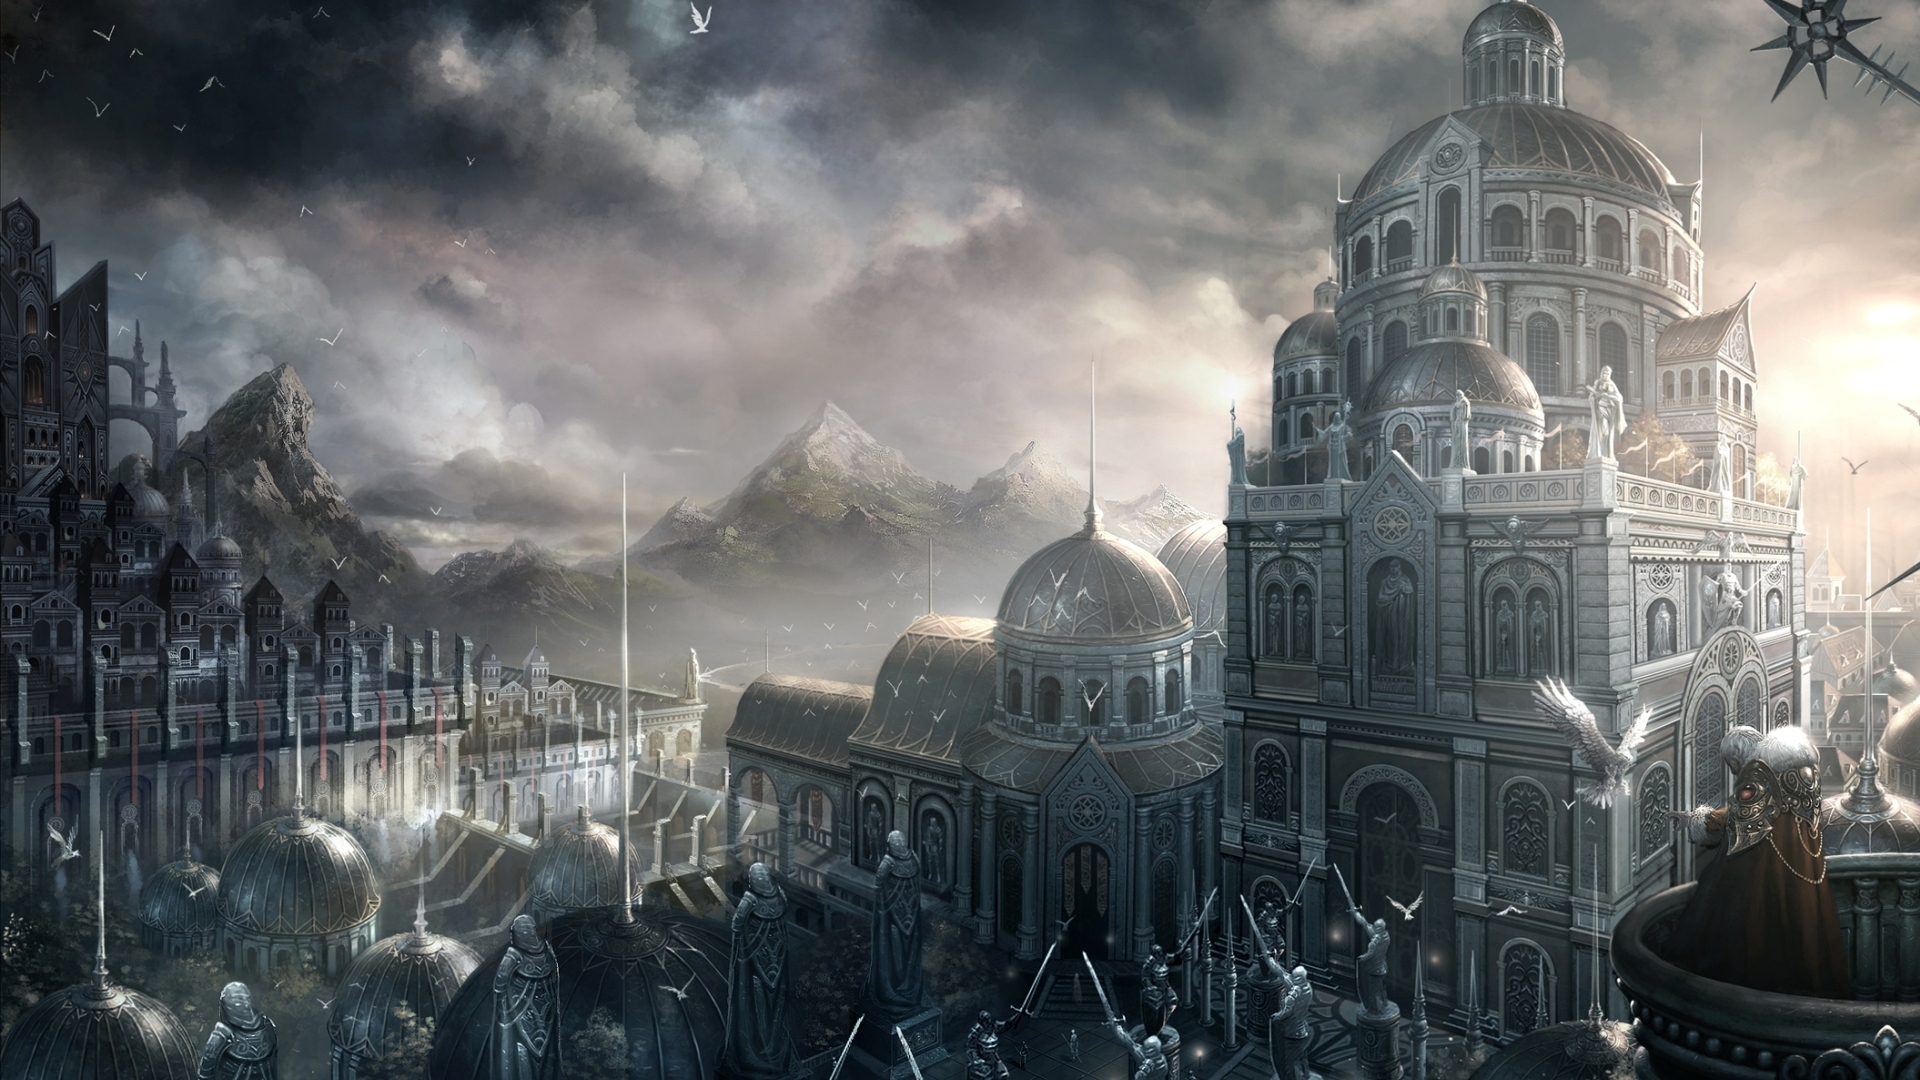 chao, Yuan, Xu, Fantasy, Art, Army, Weapons, Soldiers, Warriors, Cities, Buildings, Architecture Wallpaper